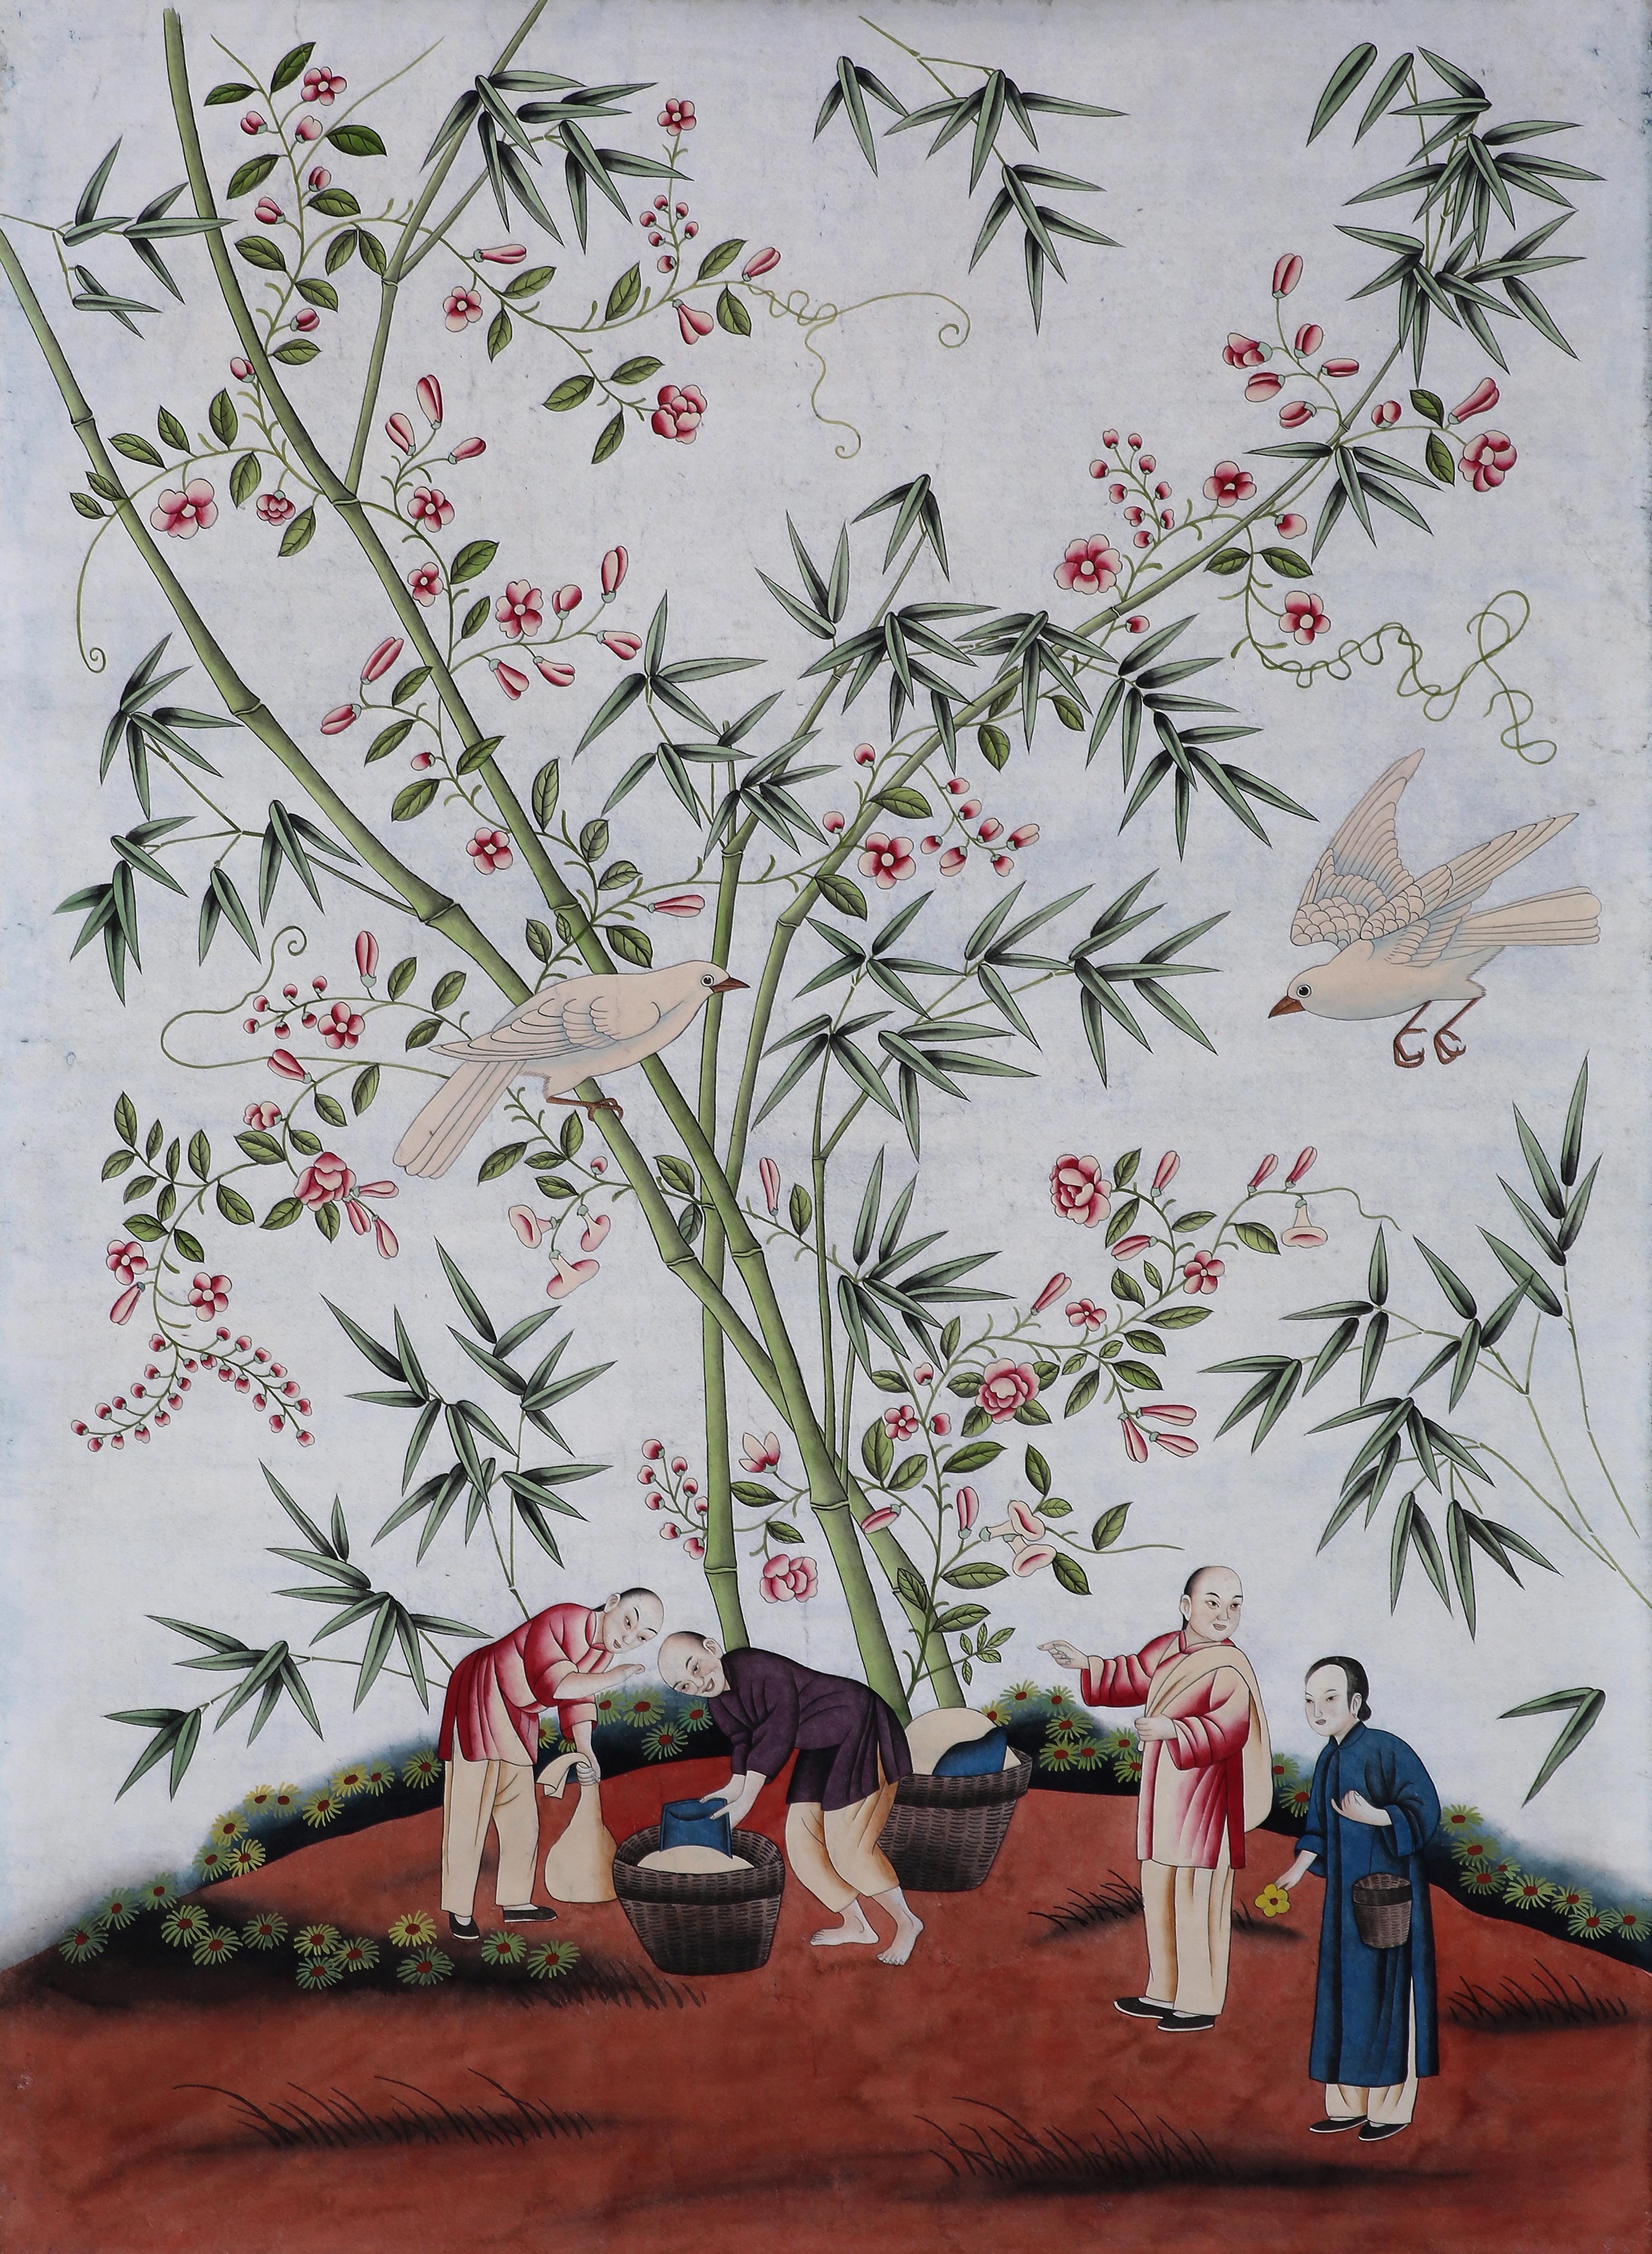 The fine pair of wallpaper panels hand painted in watercolor on rice paper, reproducing the 19th century Chinese export chinoiserie paintings of bamboo grove on export wallpaper, from our studio. An antiquing process is applied to the paintings for